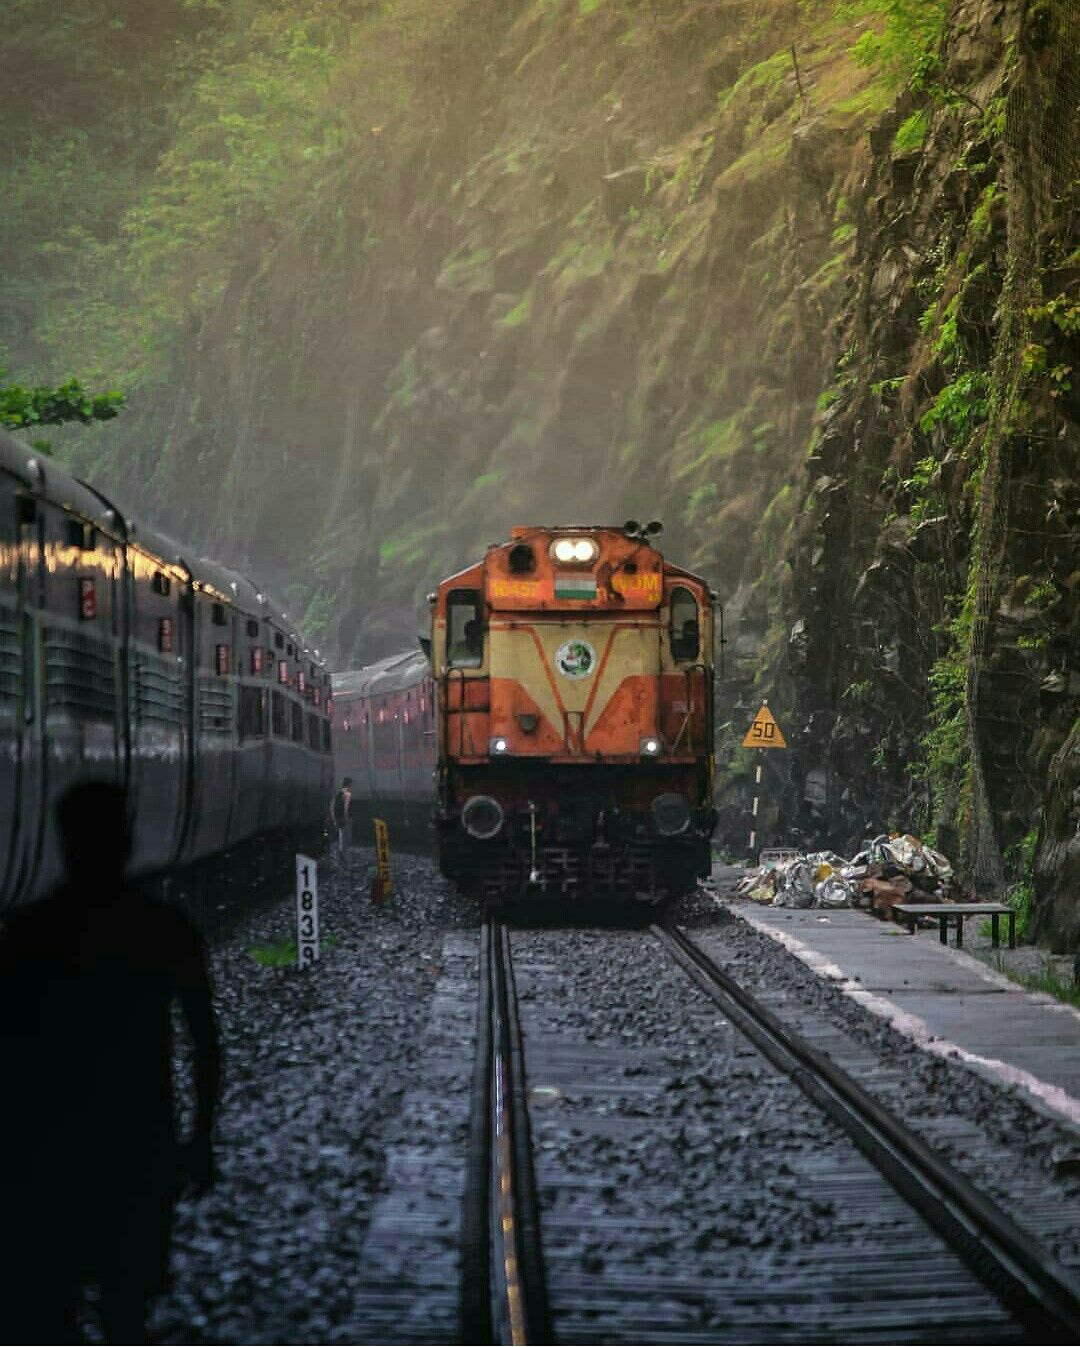 Indian Railway. Indian railway train, India travel places, Indian